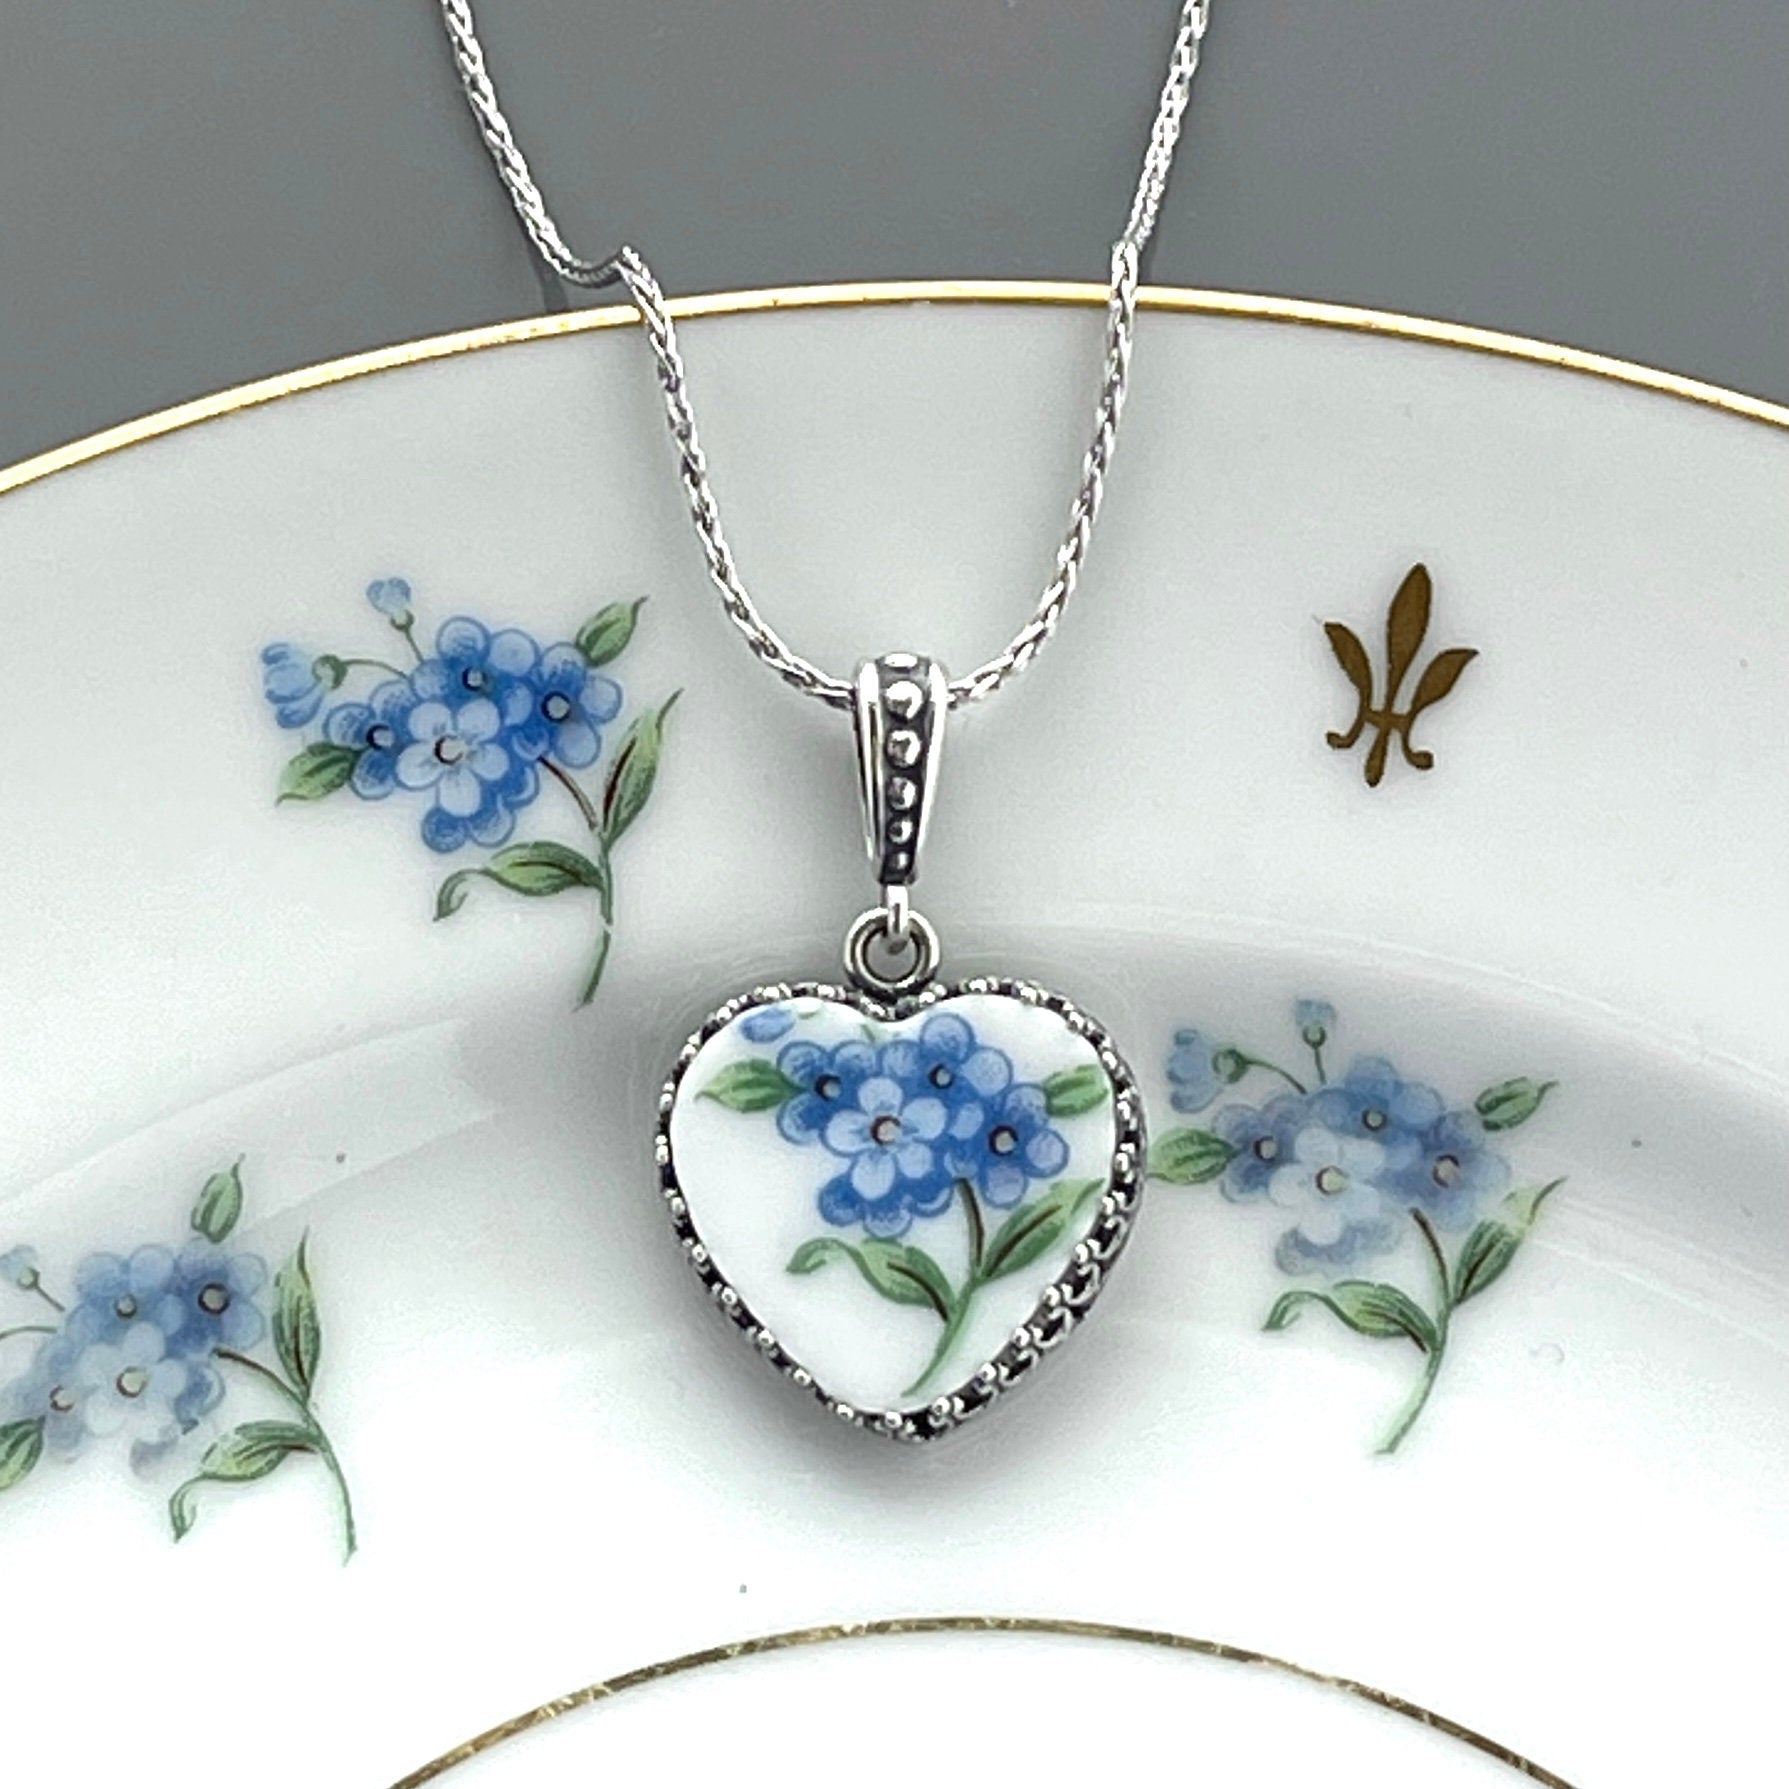 20th Anniversary China Gift for Wife, Sterling Silver Forget Me Not Necklace, Romantic Broken China Jewelry